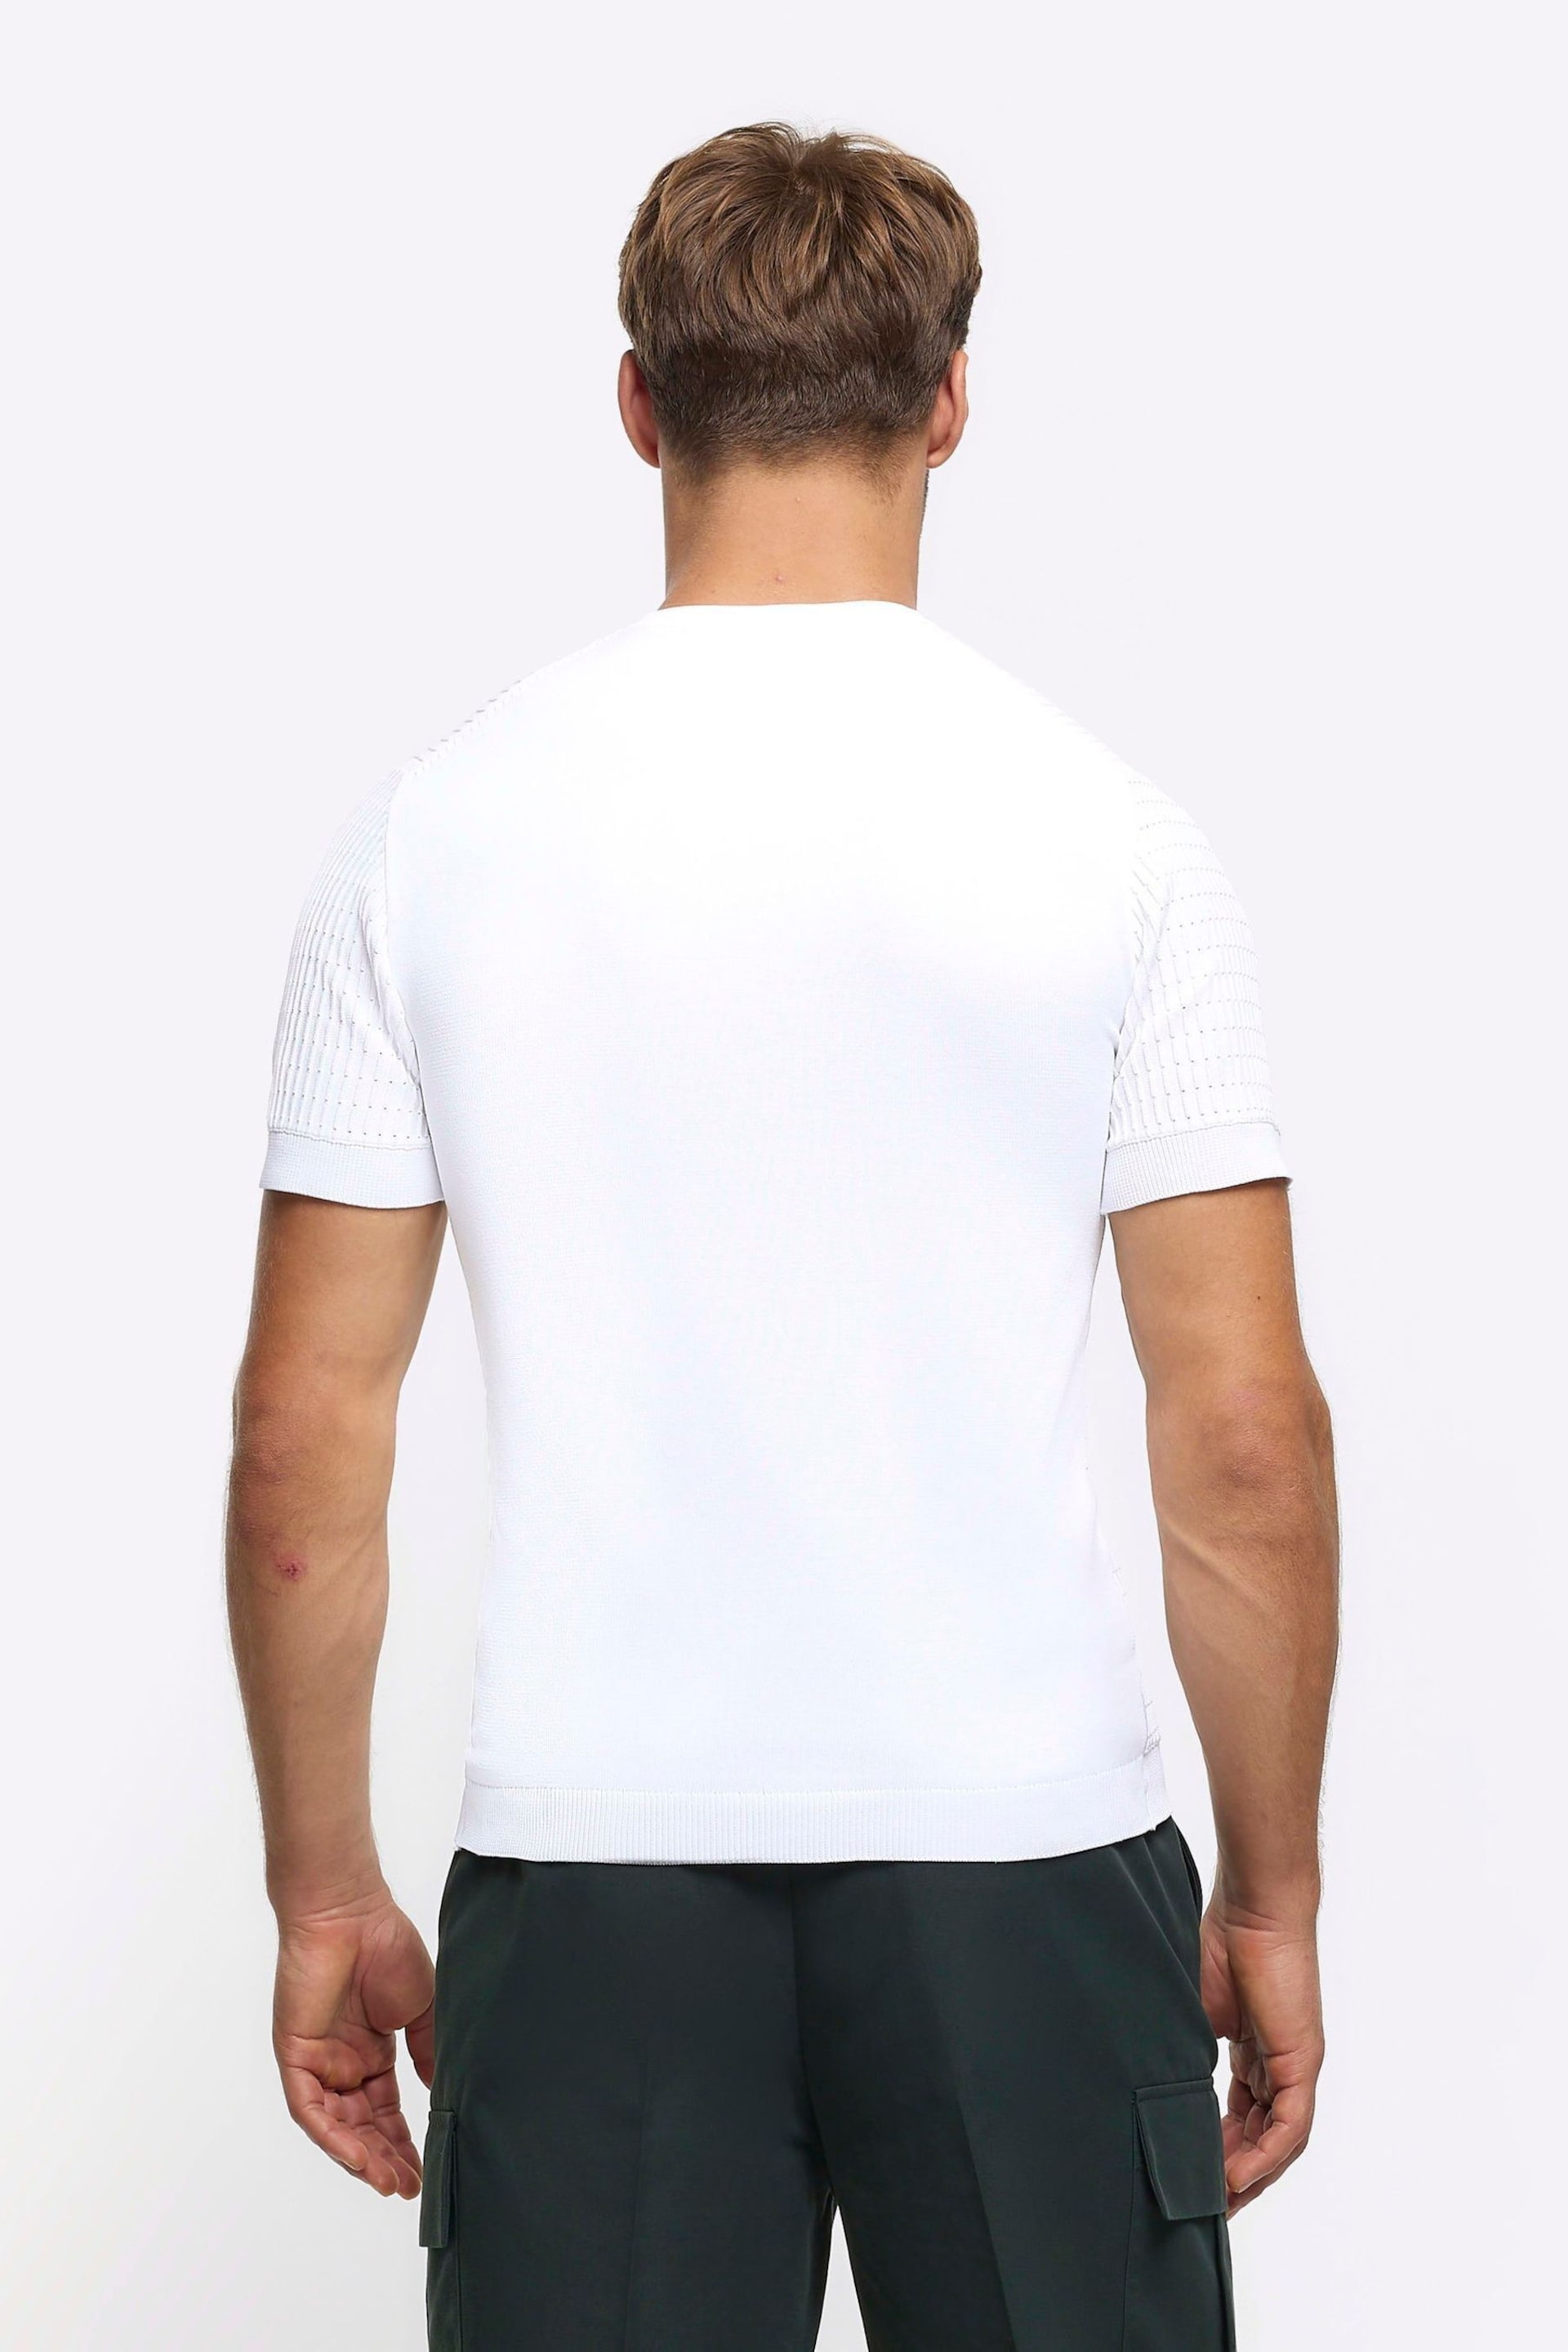 River Island White Muscle Fit Brick T-Shirt - Image 2 of 4